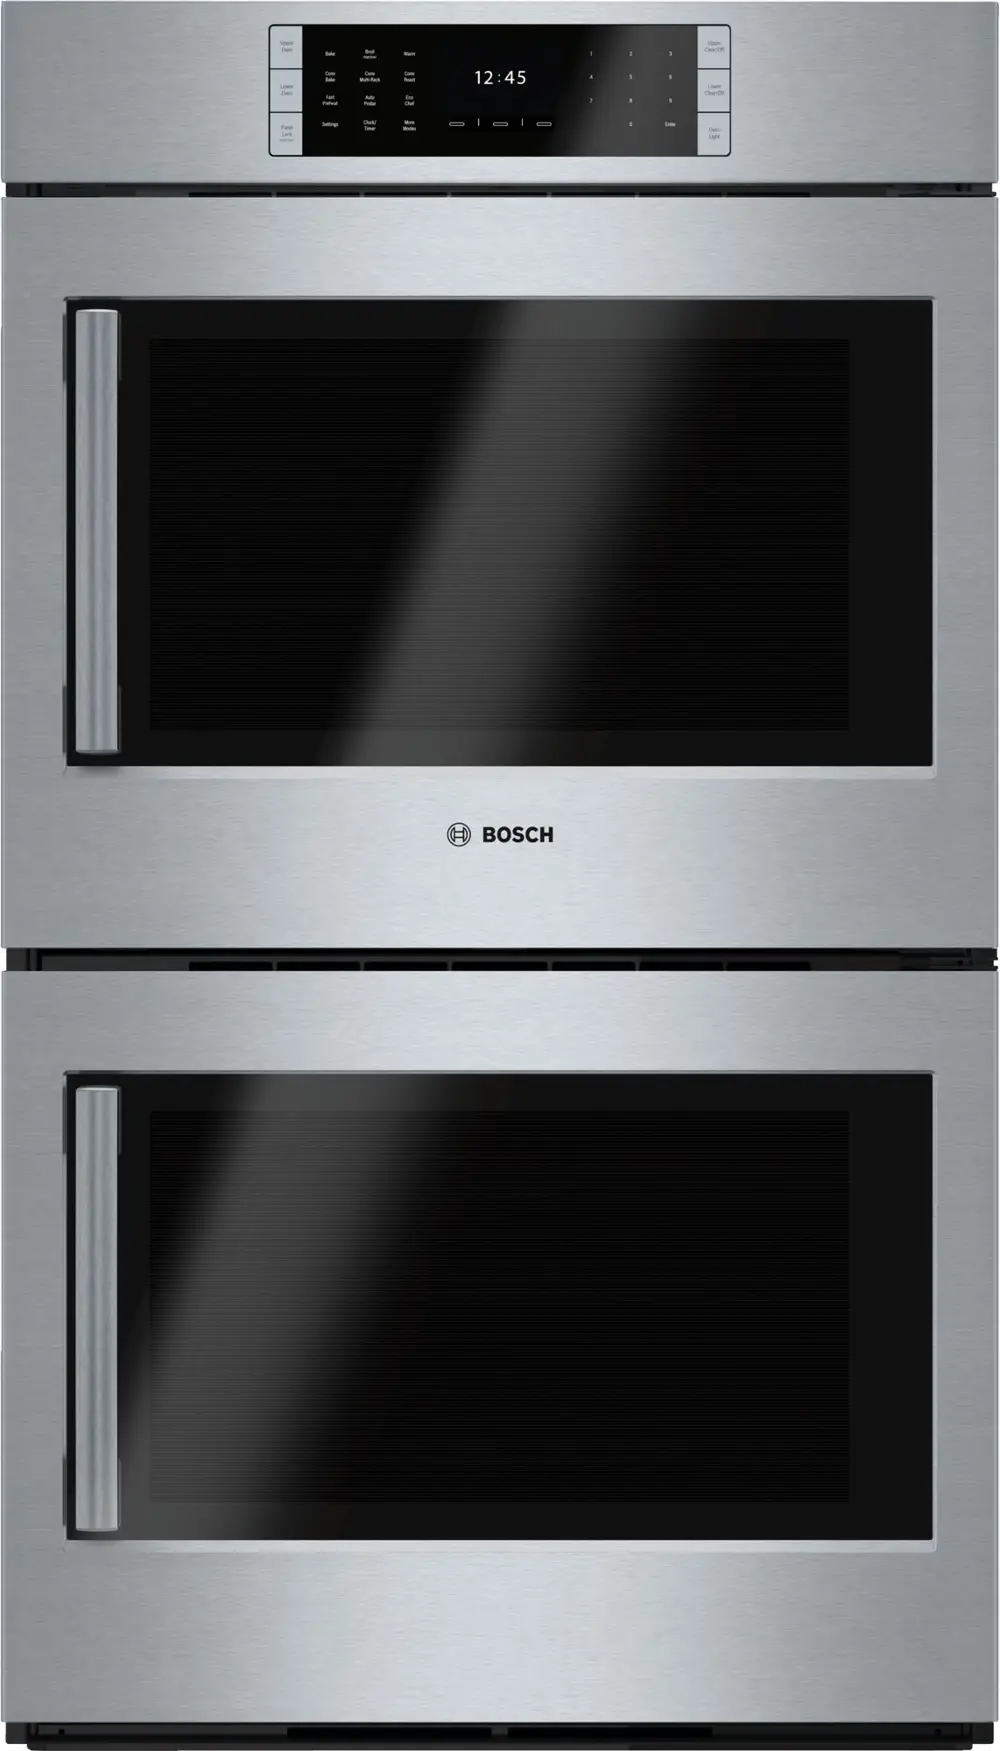 HBLP651RUC Bosch 9.2 cu ft Double Wall Oven - Stainless Steel 30 Inch-1